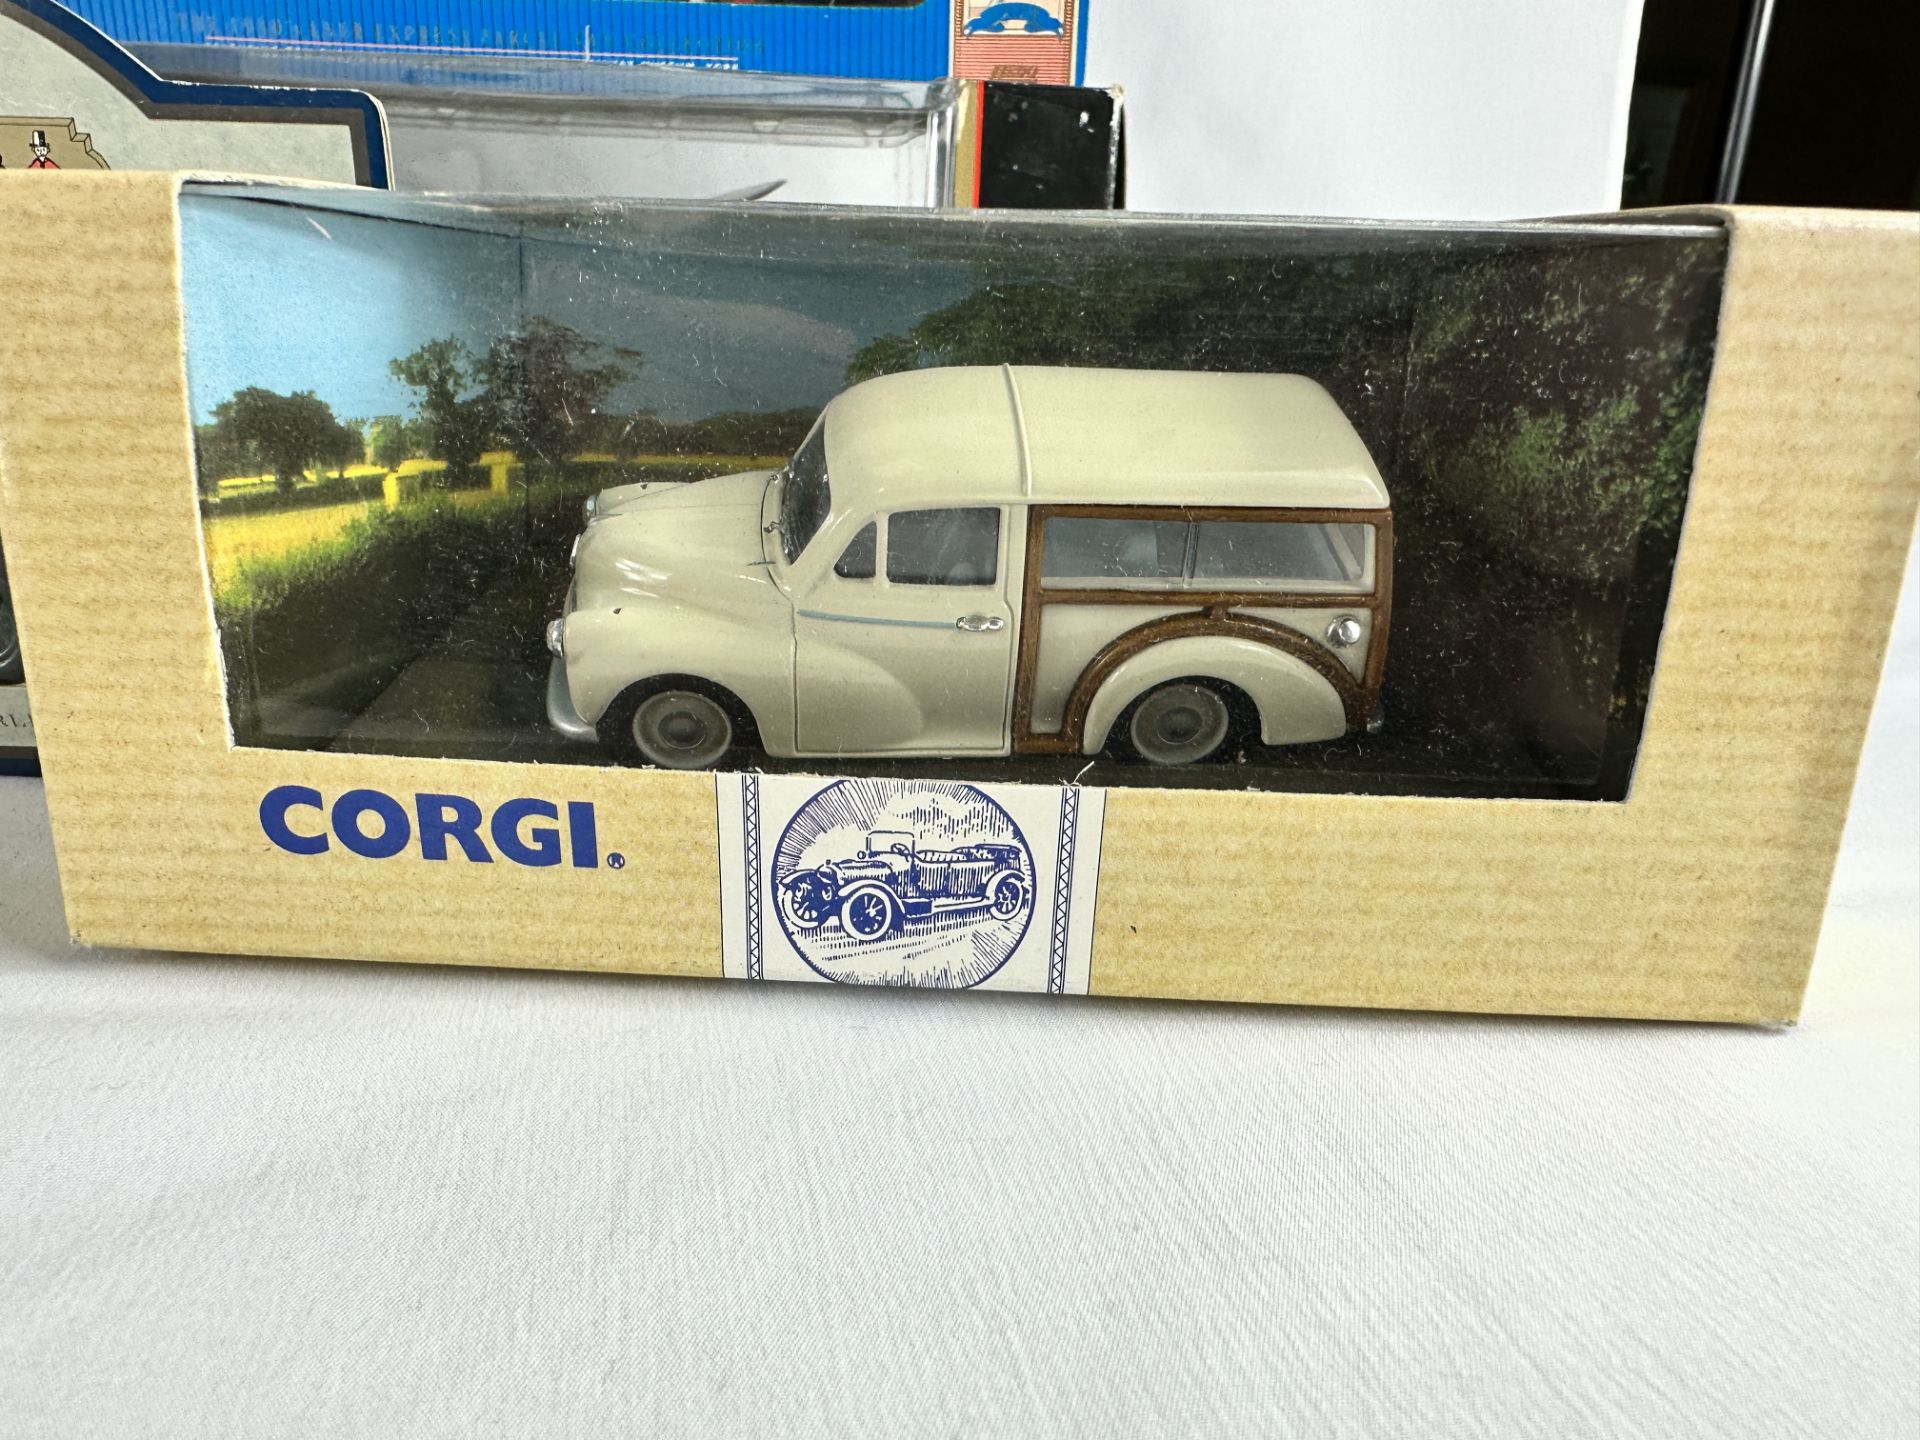 Corgi F1 model car, together with other model vehicles - Image 6 of 9